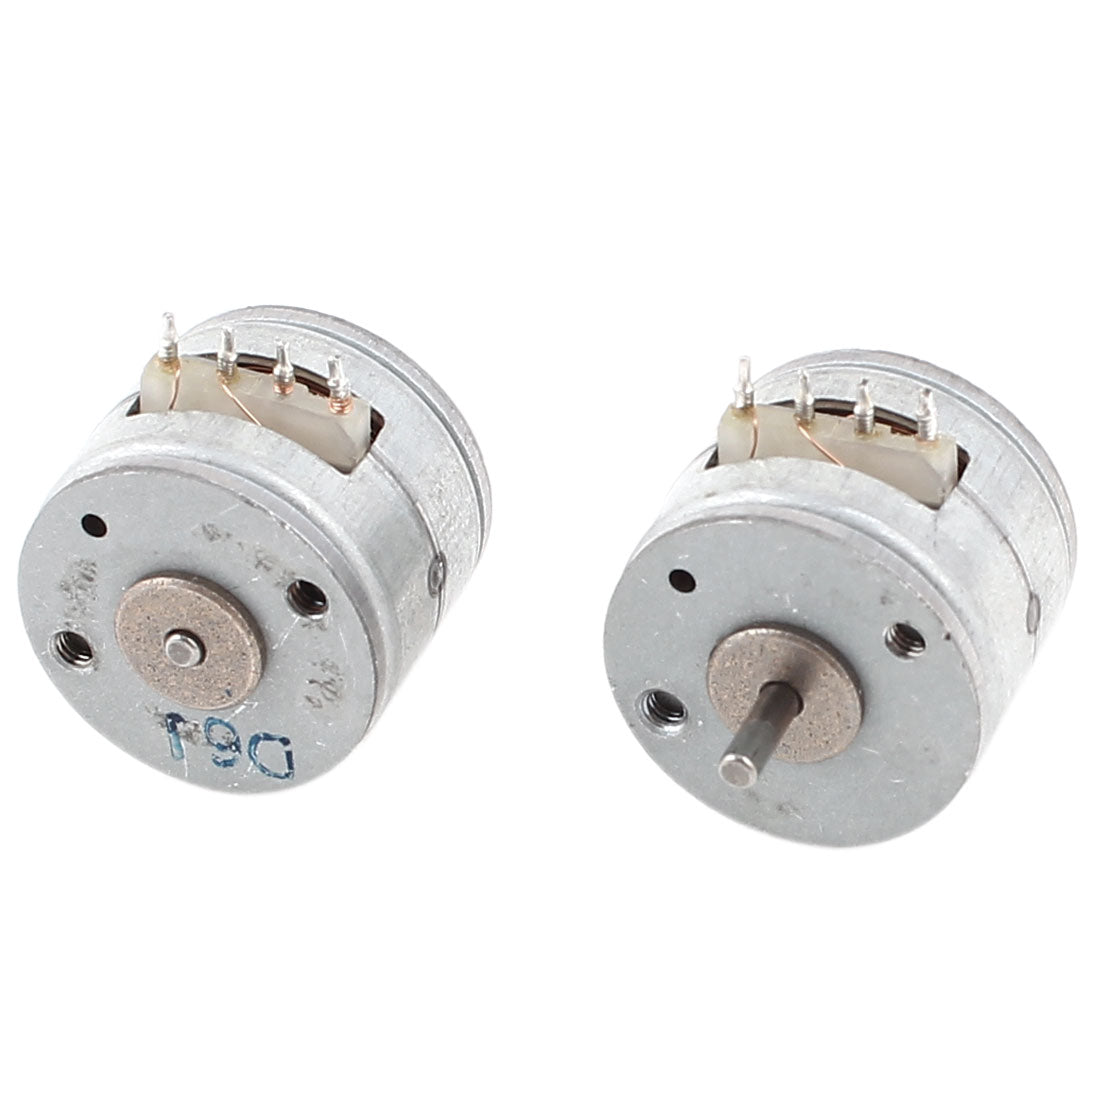 2pcs 2-phase 4-wire 5*7MM stepper motor micro DC3V-5V motor with Long screw 